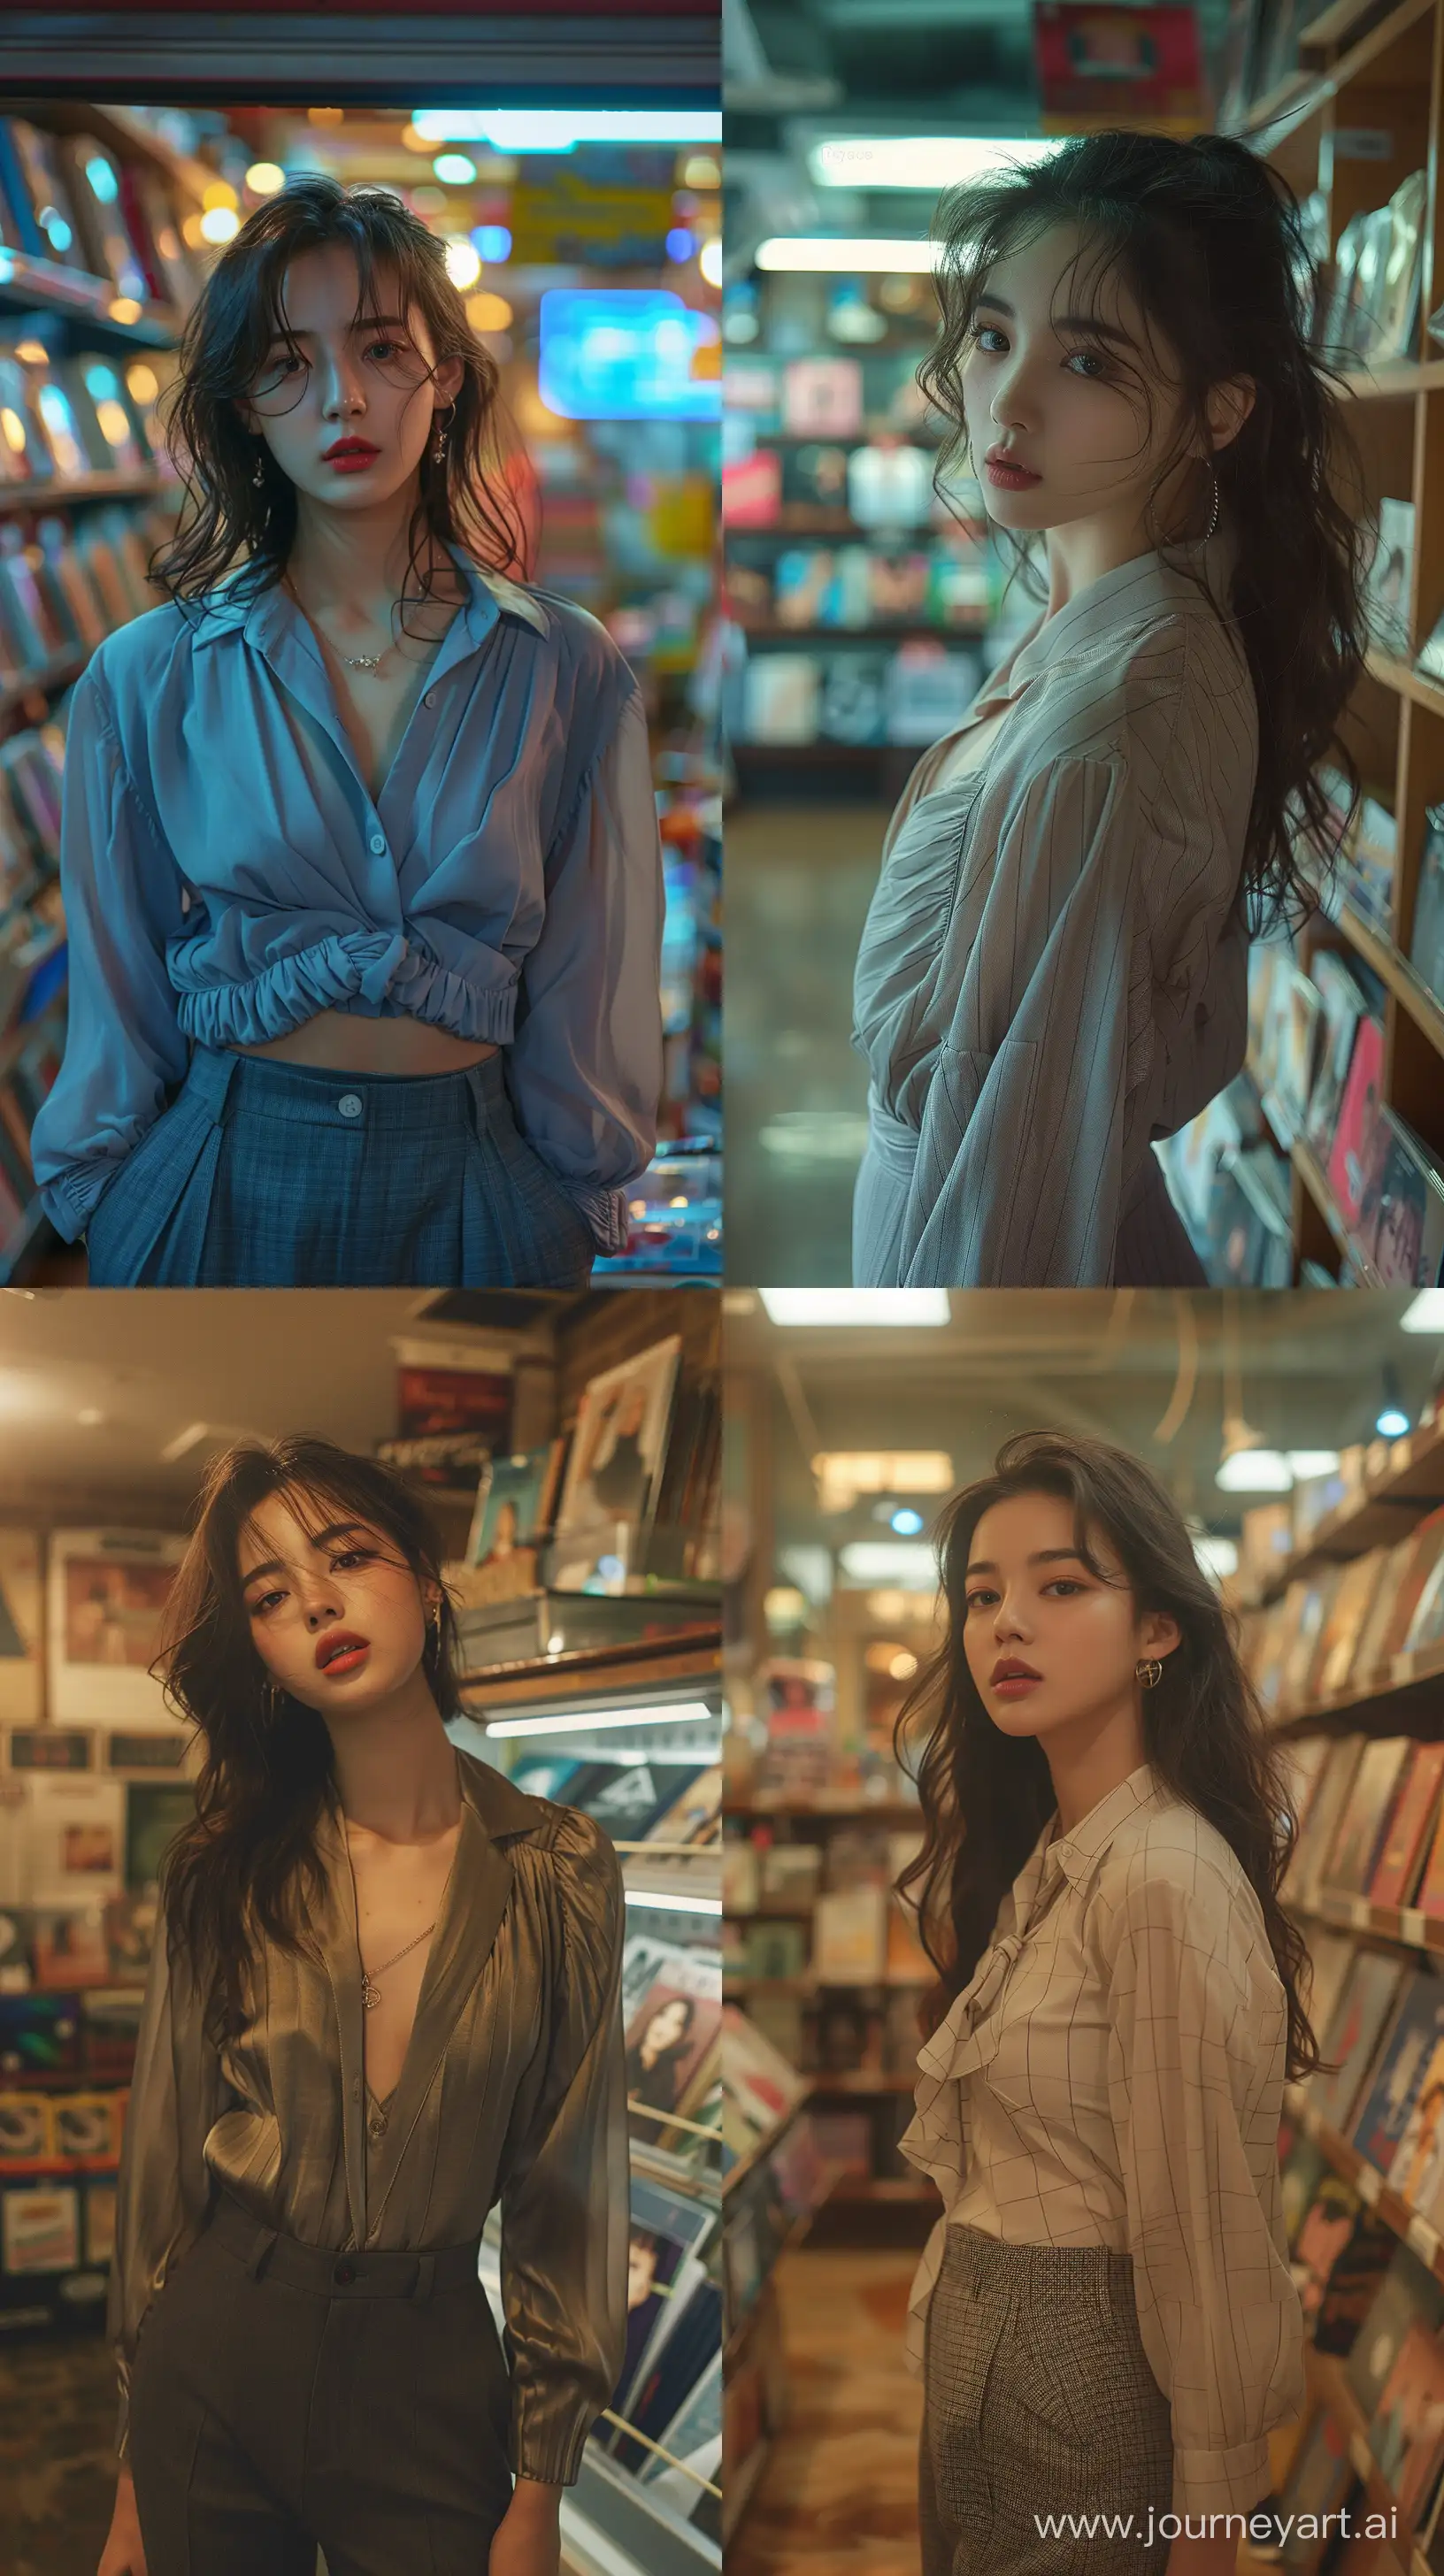 Blackpinks-Rose-in-Stylish-Attire-Inside-Mysterious-Nocturnal-Album-Store